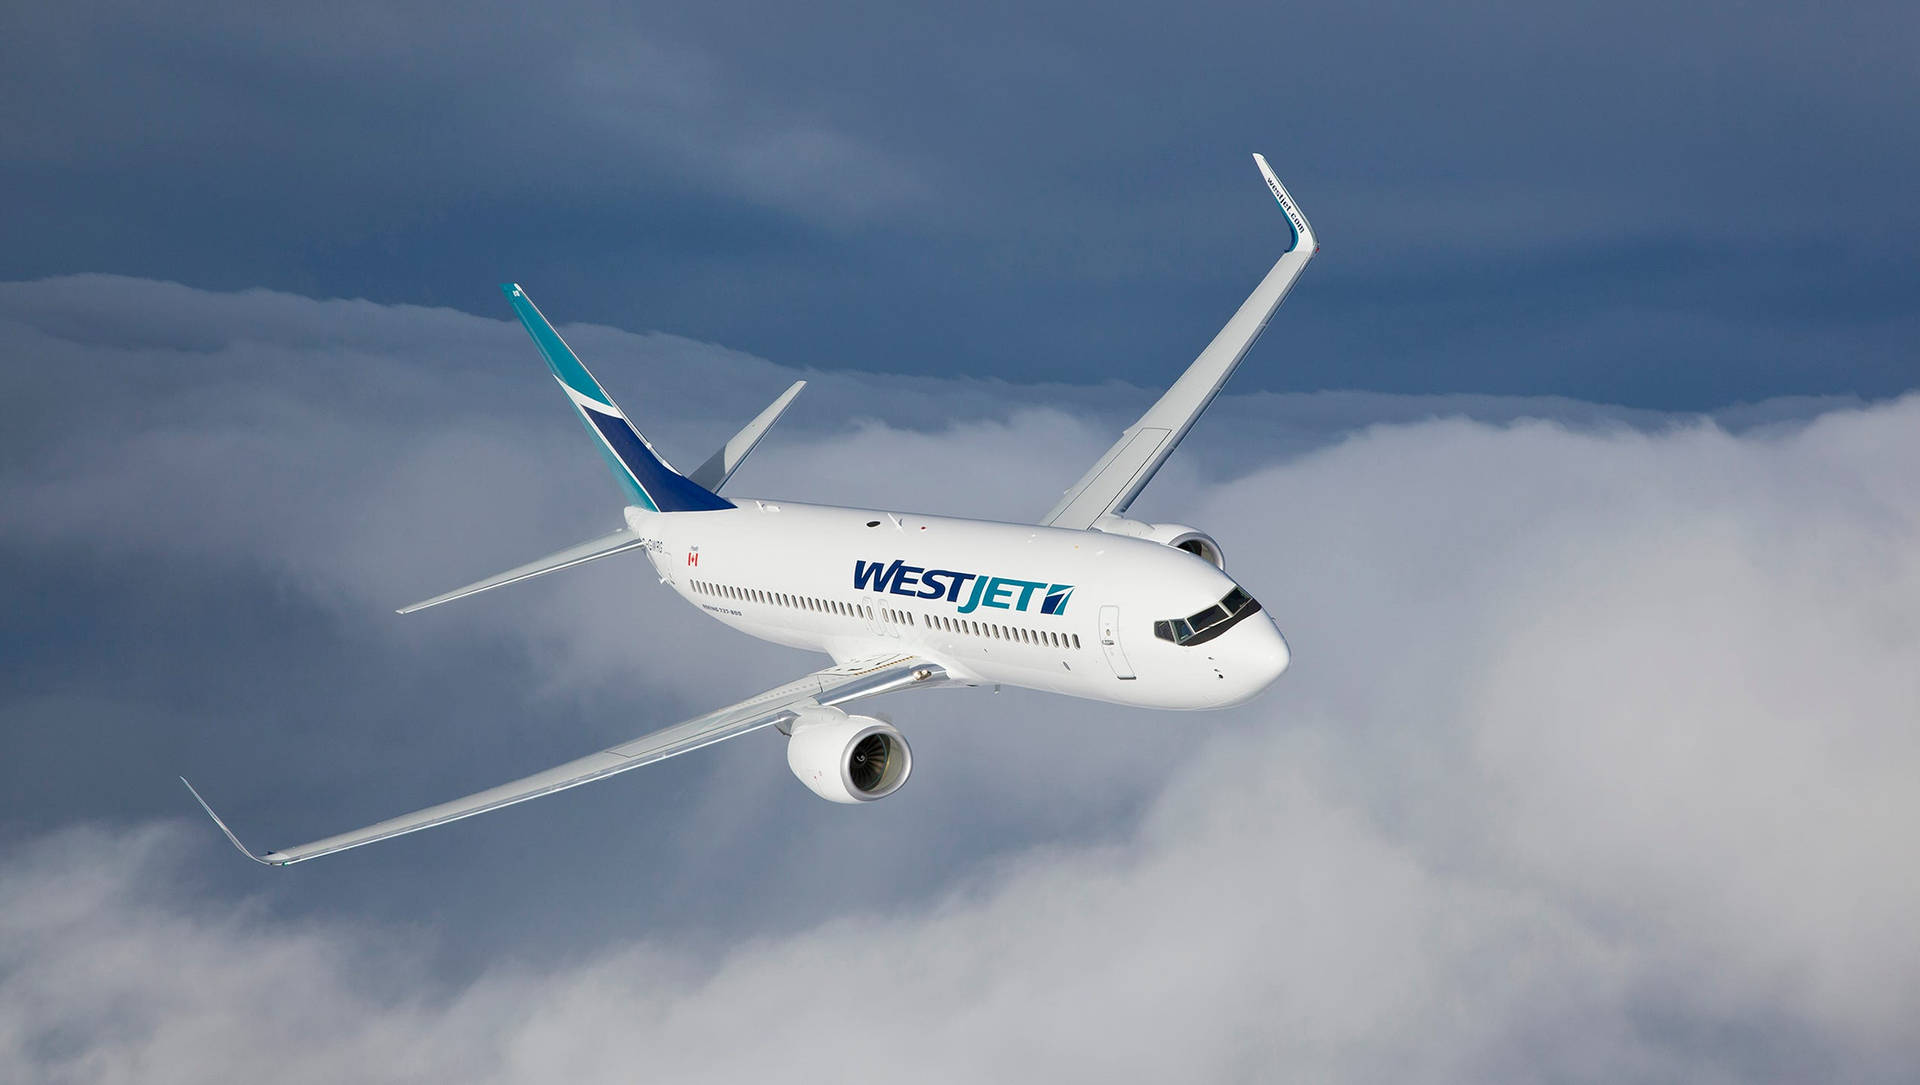 Westjet Airplane Gliding Over Cloudy Sky Wallpaper